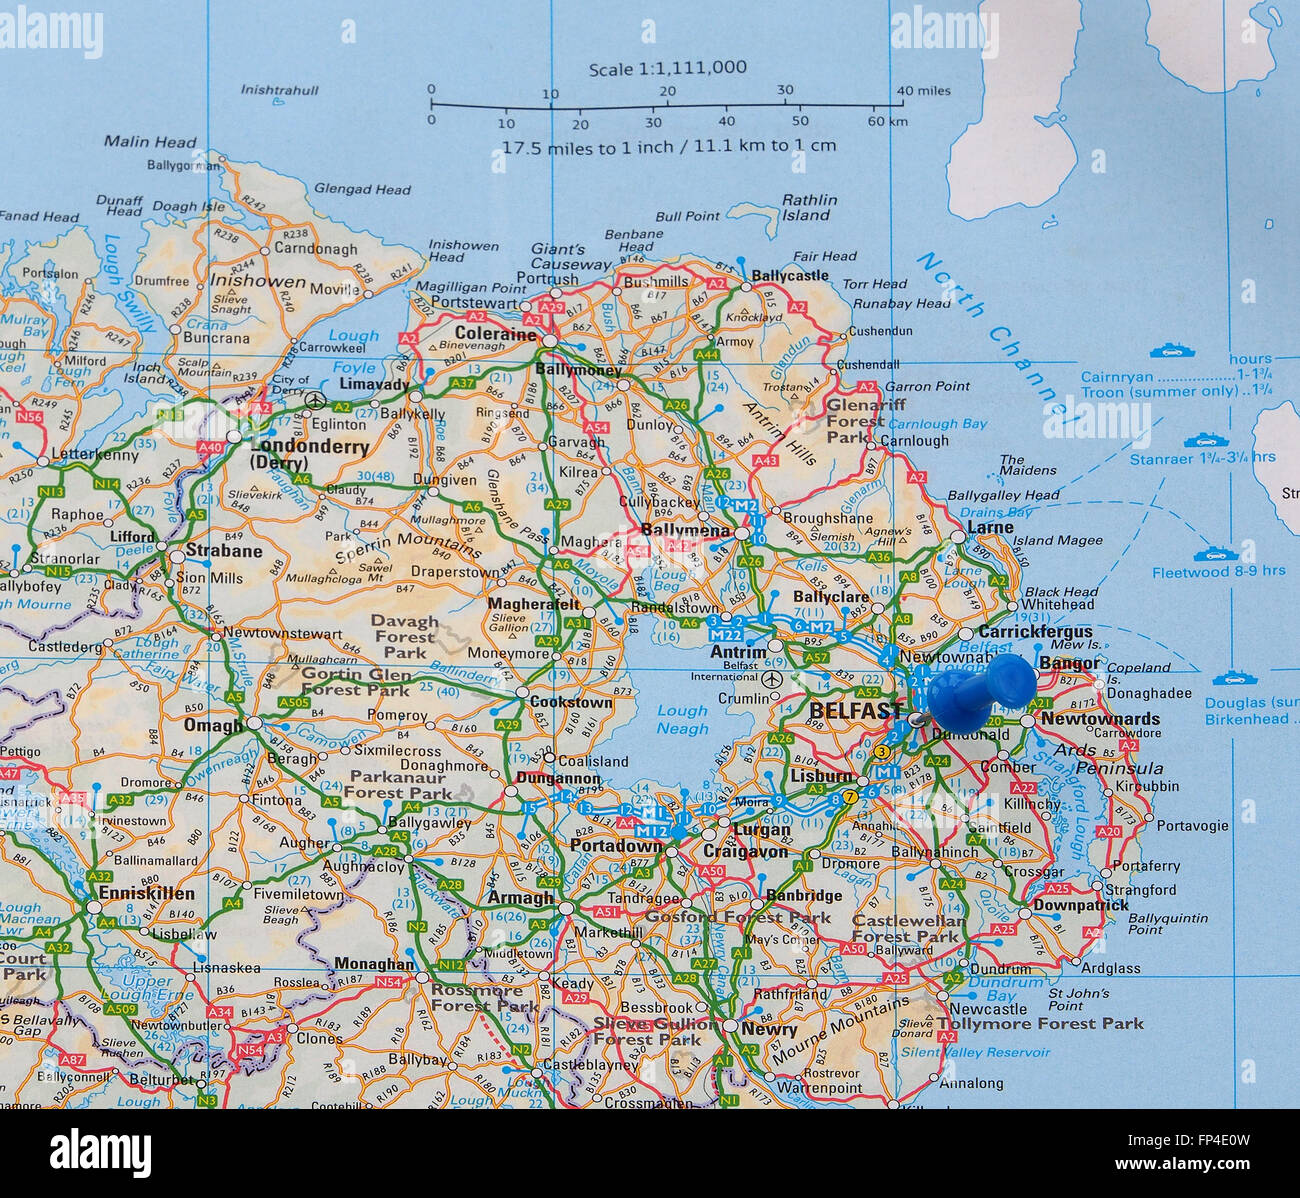 Road map of Northern Ireland, with a map pin indicating Belfast, in County Antrim, the capital of Northern Ireland. Stock Photo